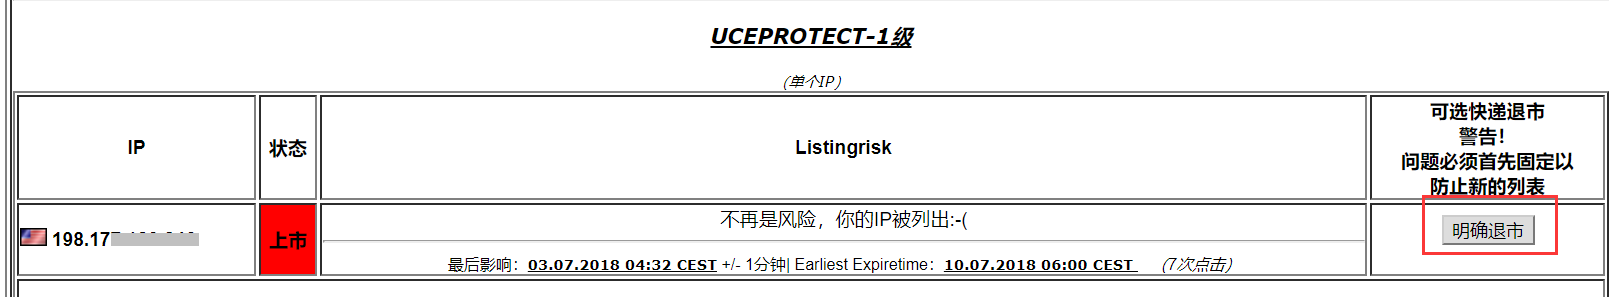 uceprotect2